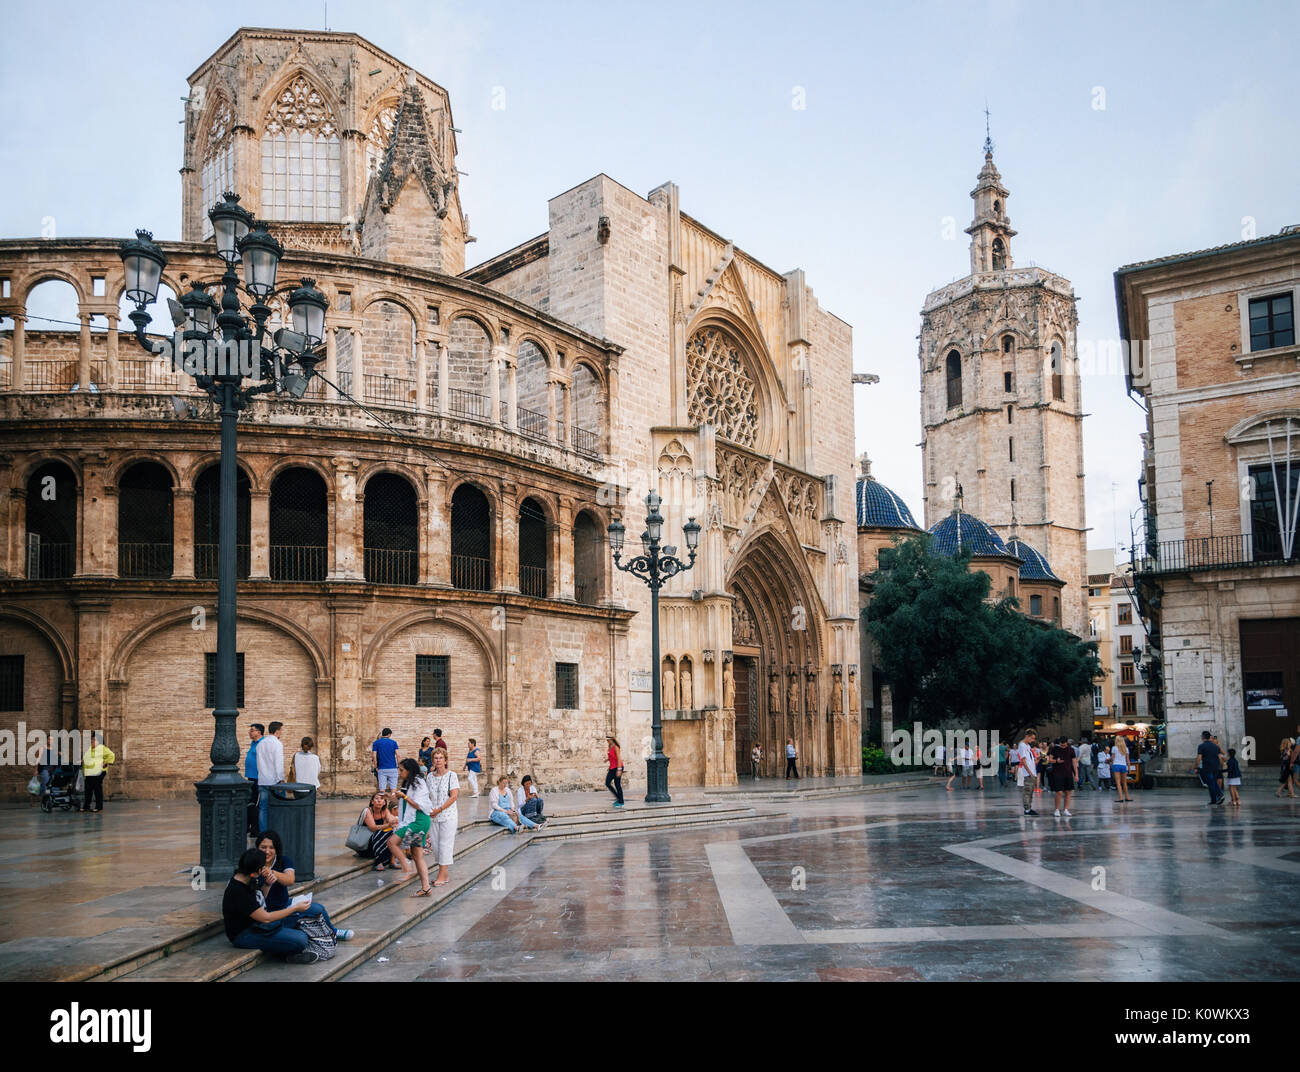 Valencia, Spain - June 2, 2016: Square of Saint Mary with local and tourists in Valencia Old Town in the evening, Spain Stock Photo